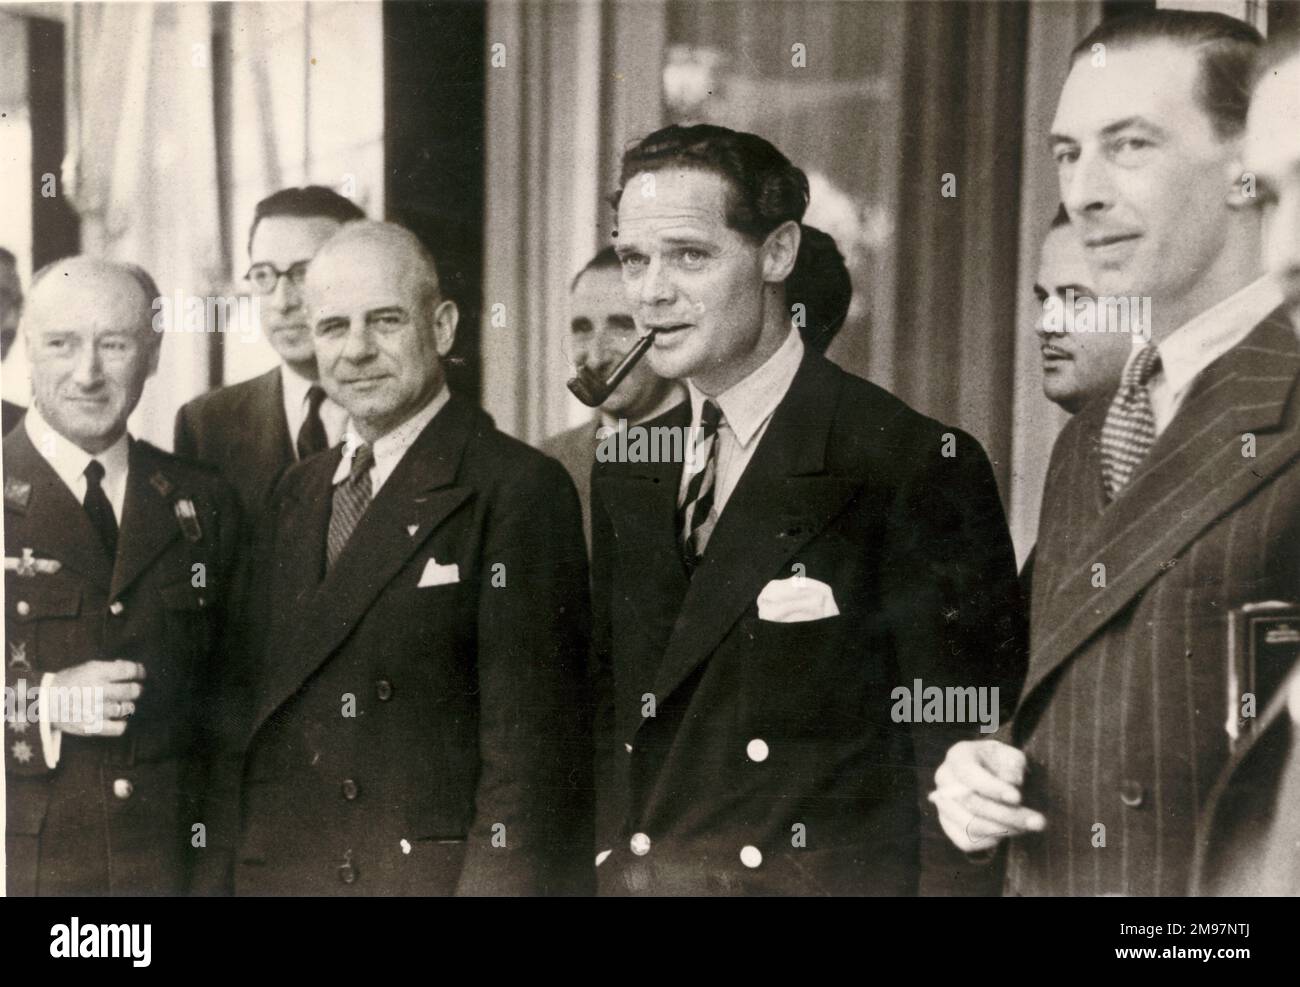 Lt Gen James Doolittle and Grp Capt Douglas Bader with the Air Attaché to the British Embassy in Madrid and the Colonel-in-Charge of the Barajas Airport on their arrival in Madrid. Stock Photo